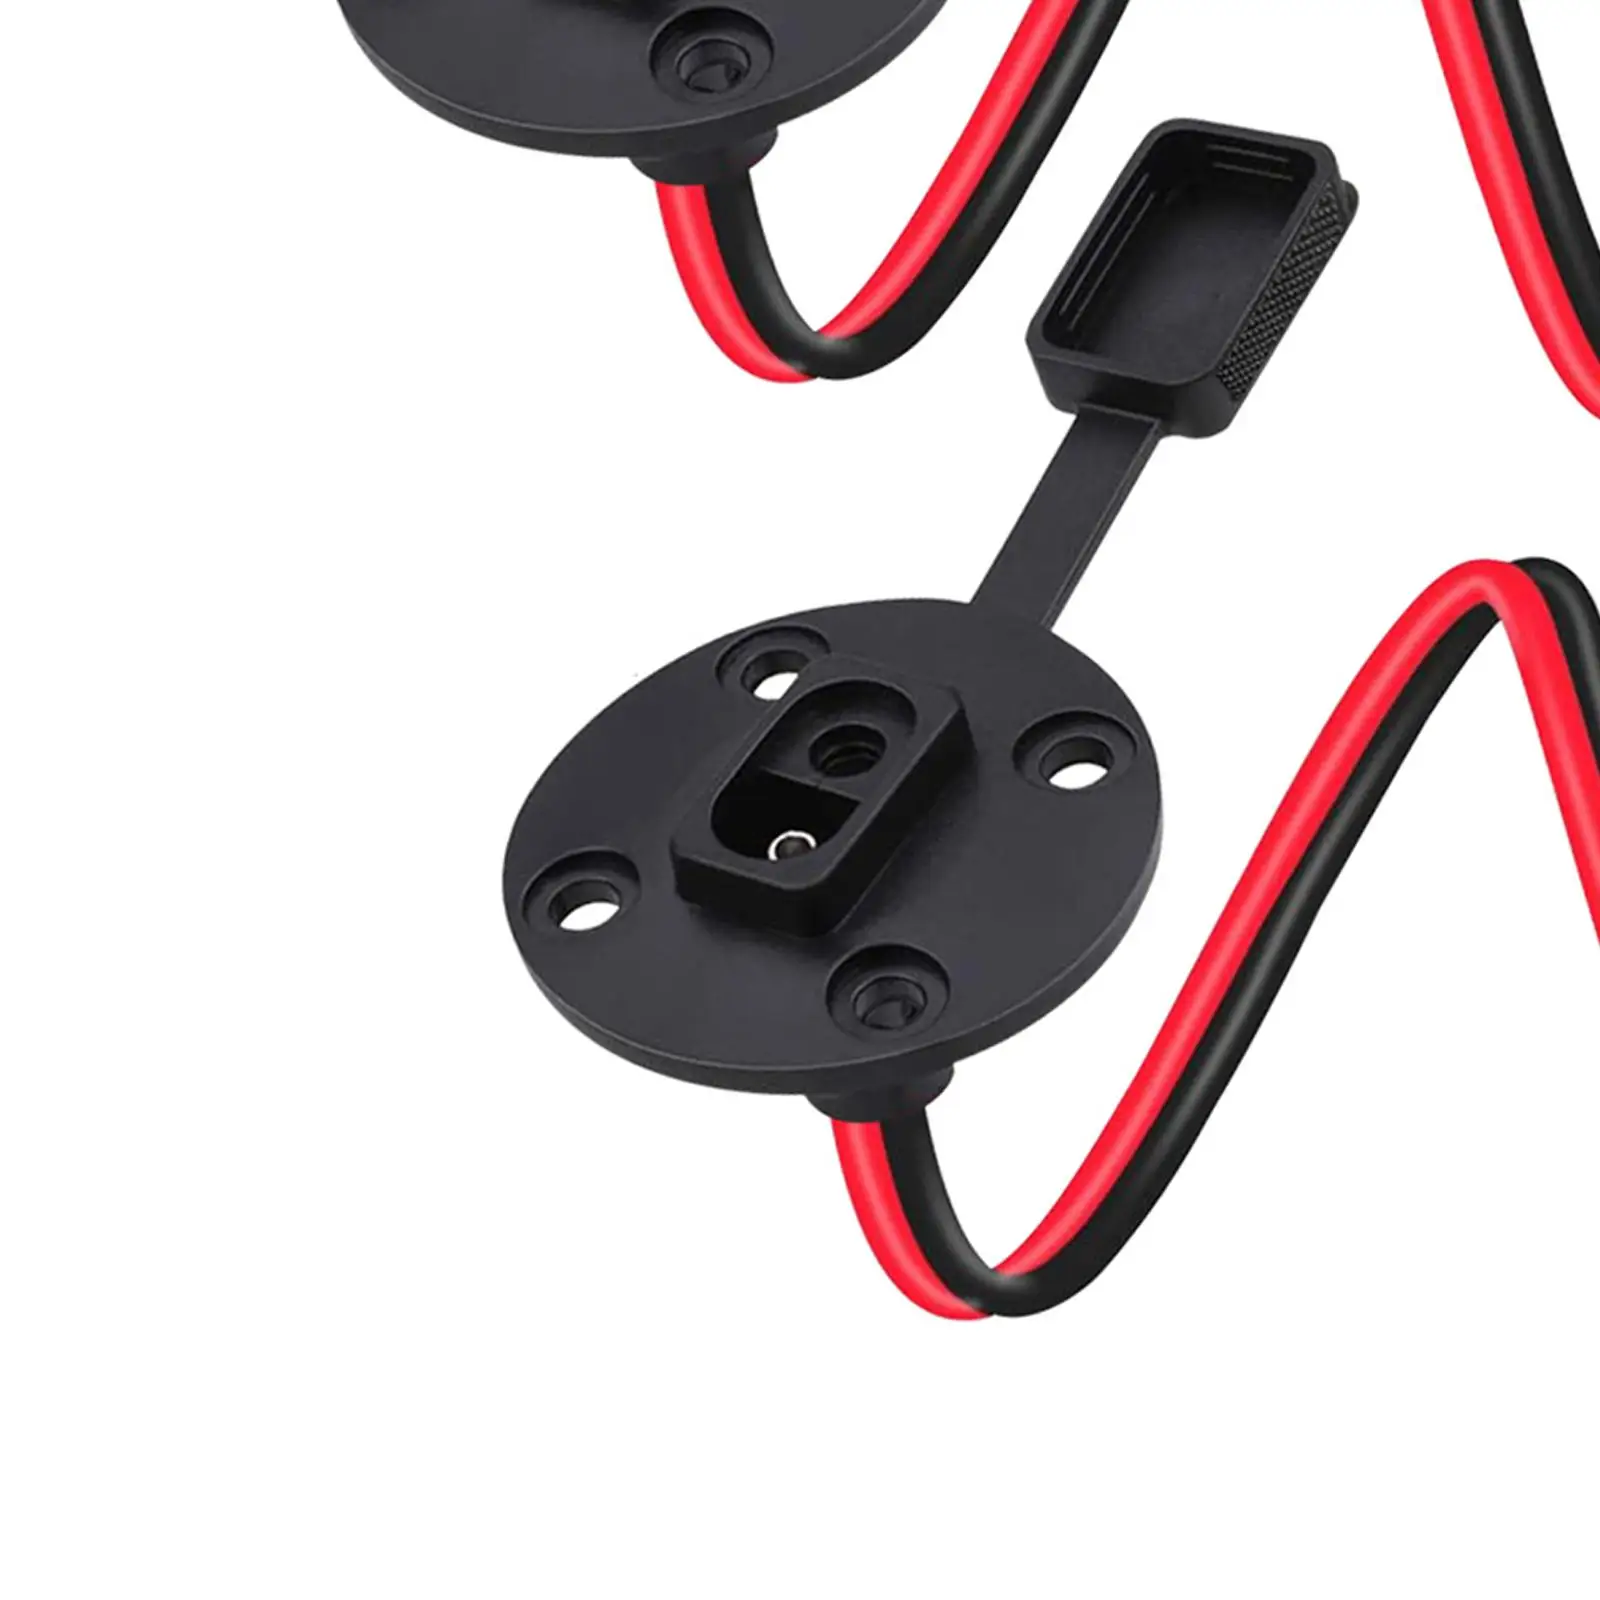 2x SAE Socket 2 Holes Harness Waterproof Cap 12AWG RV Sidewall Port Cars Accessory Tractor SAE Battery Connector Battery Cables